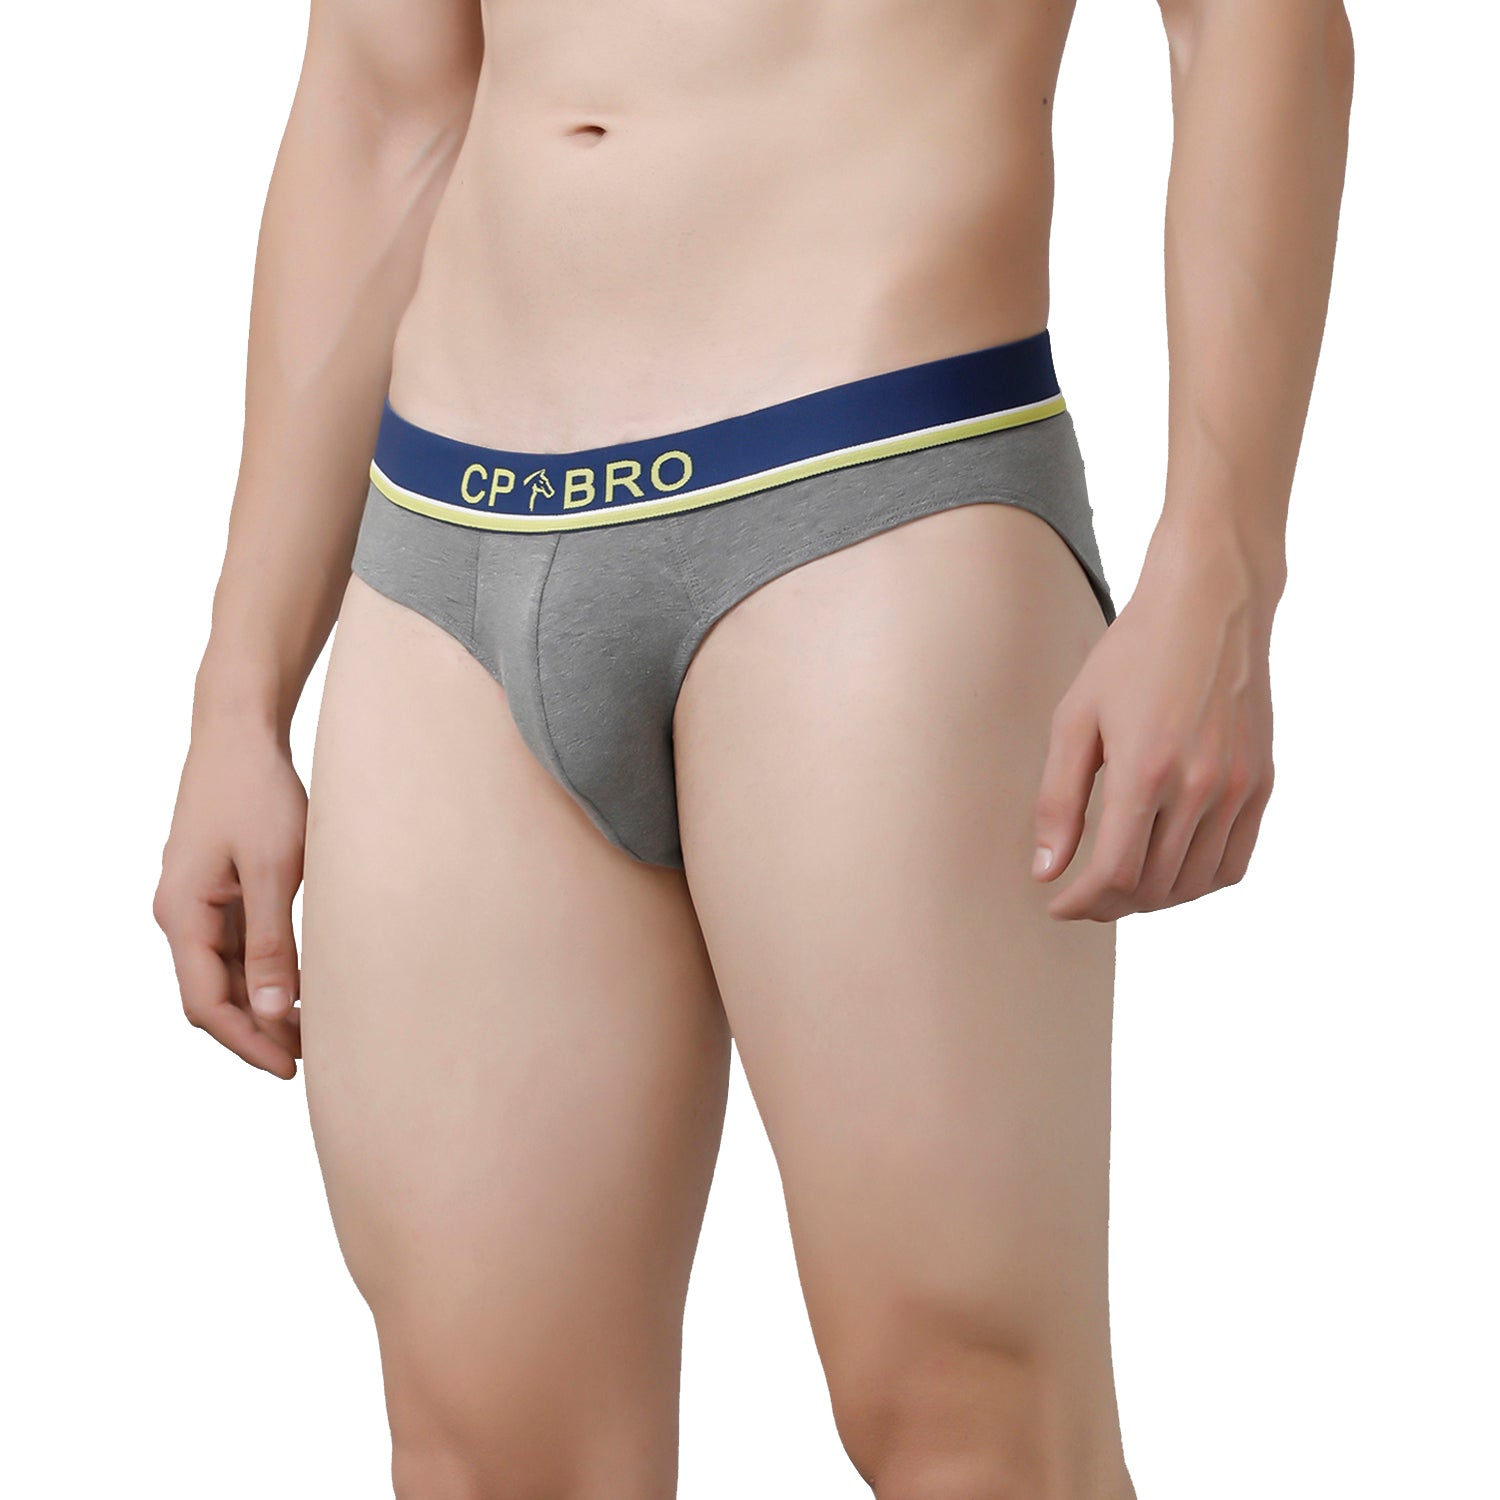 CP BRO Men's Solid Briefs with Exposed Waistband Value Pack - Grey & Navy (Pack of 2)